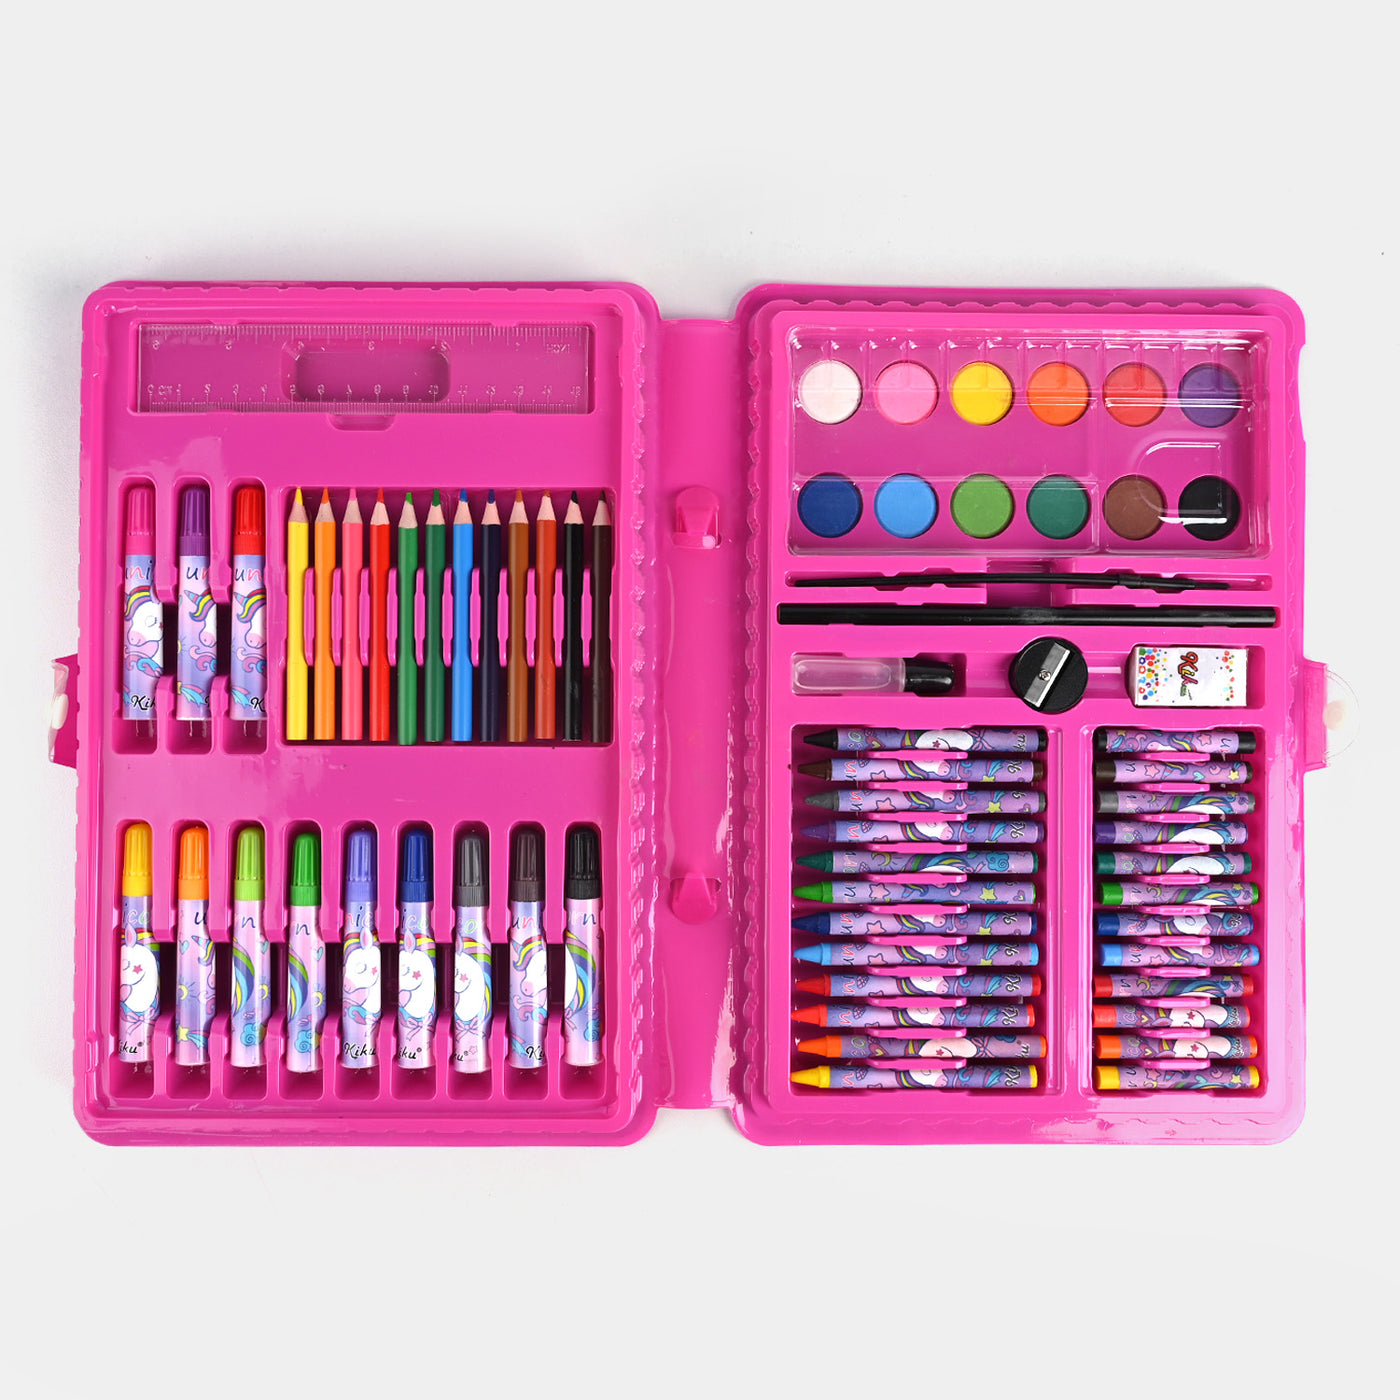 DRAWING KIT BEAUTIFUL COLORS FOR PAINTING | 68PCS